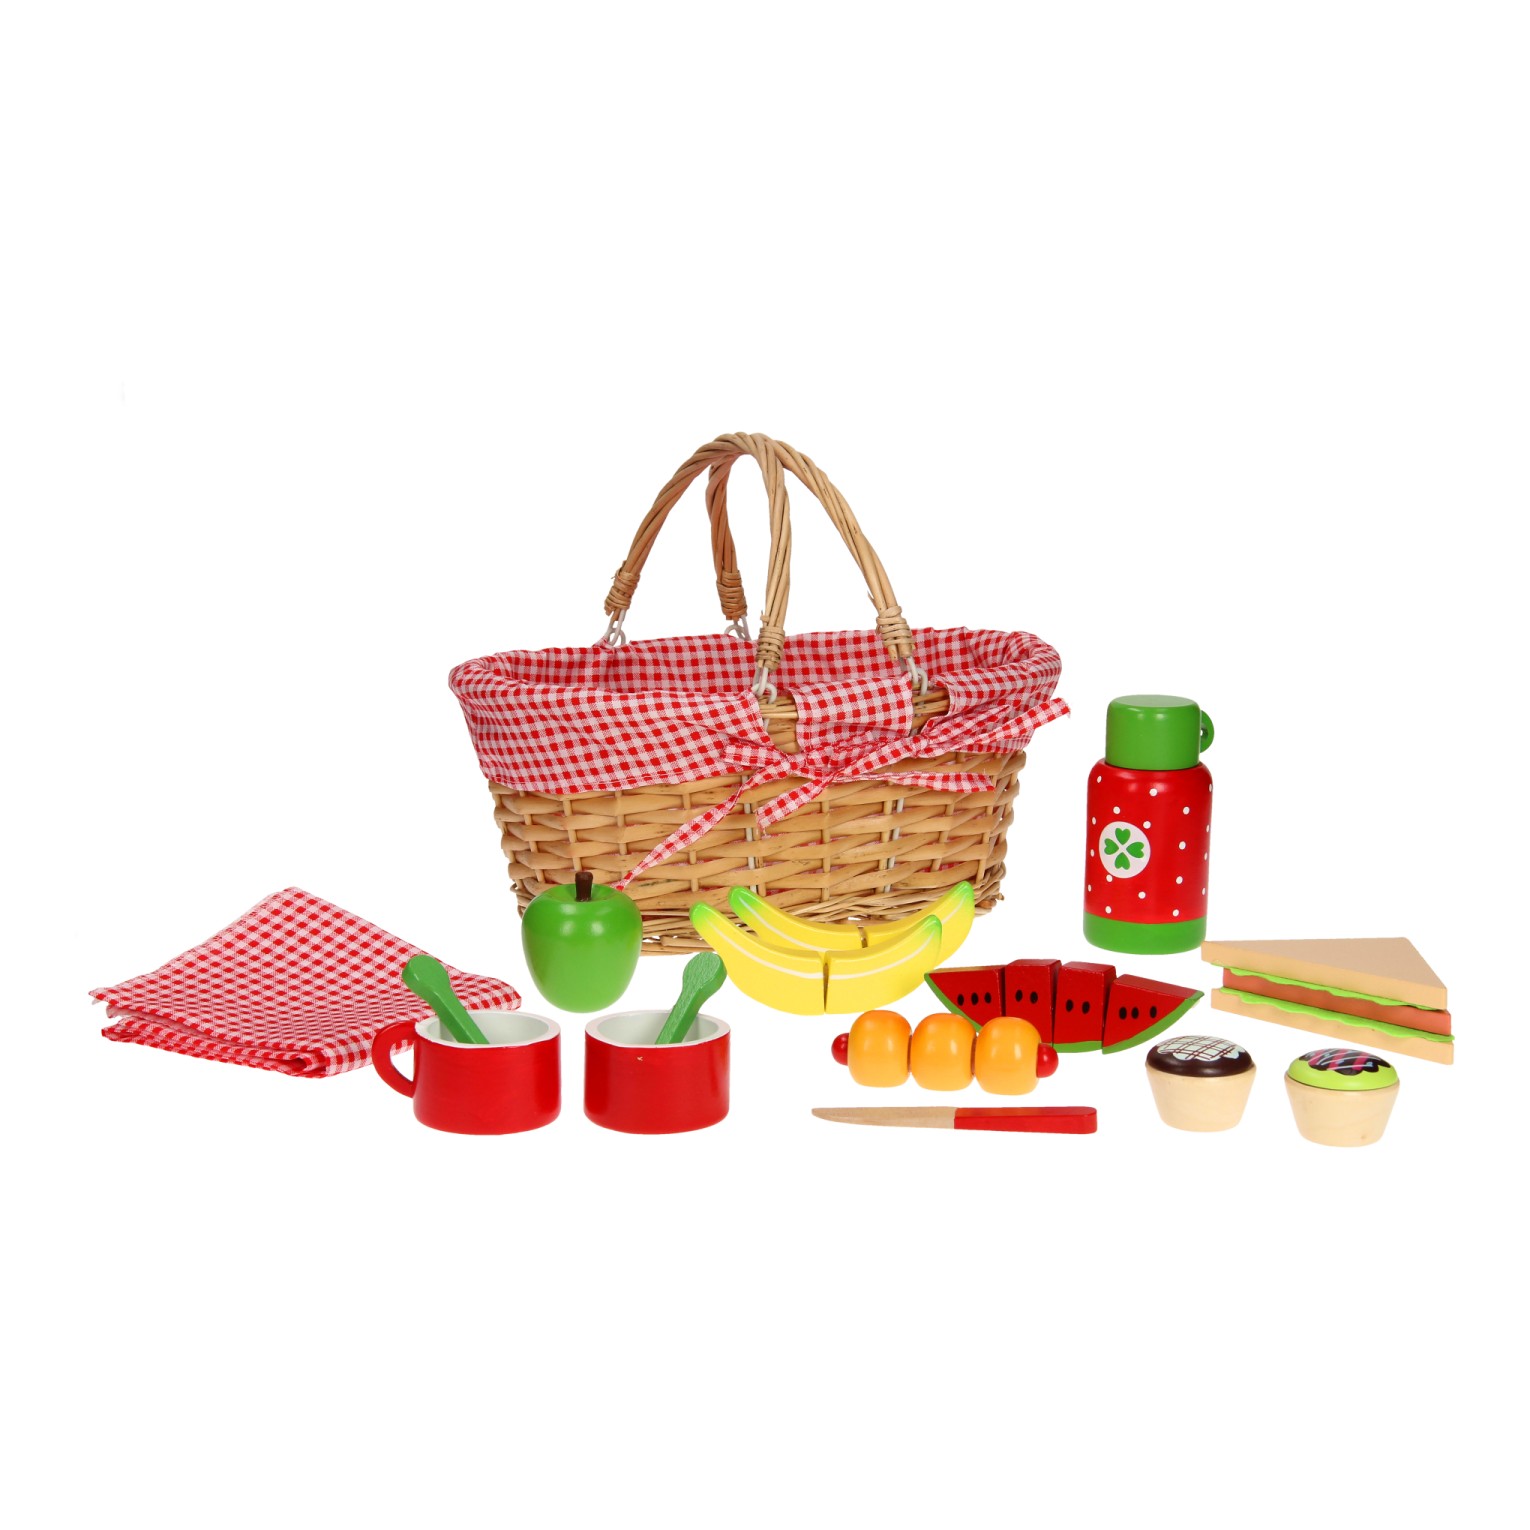 Picnic basket with Content.